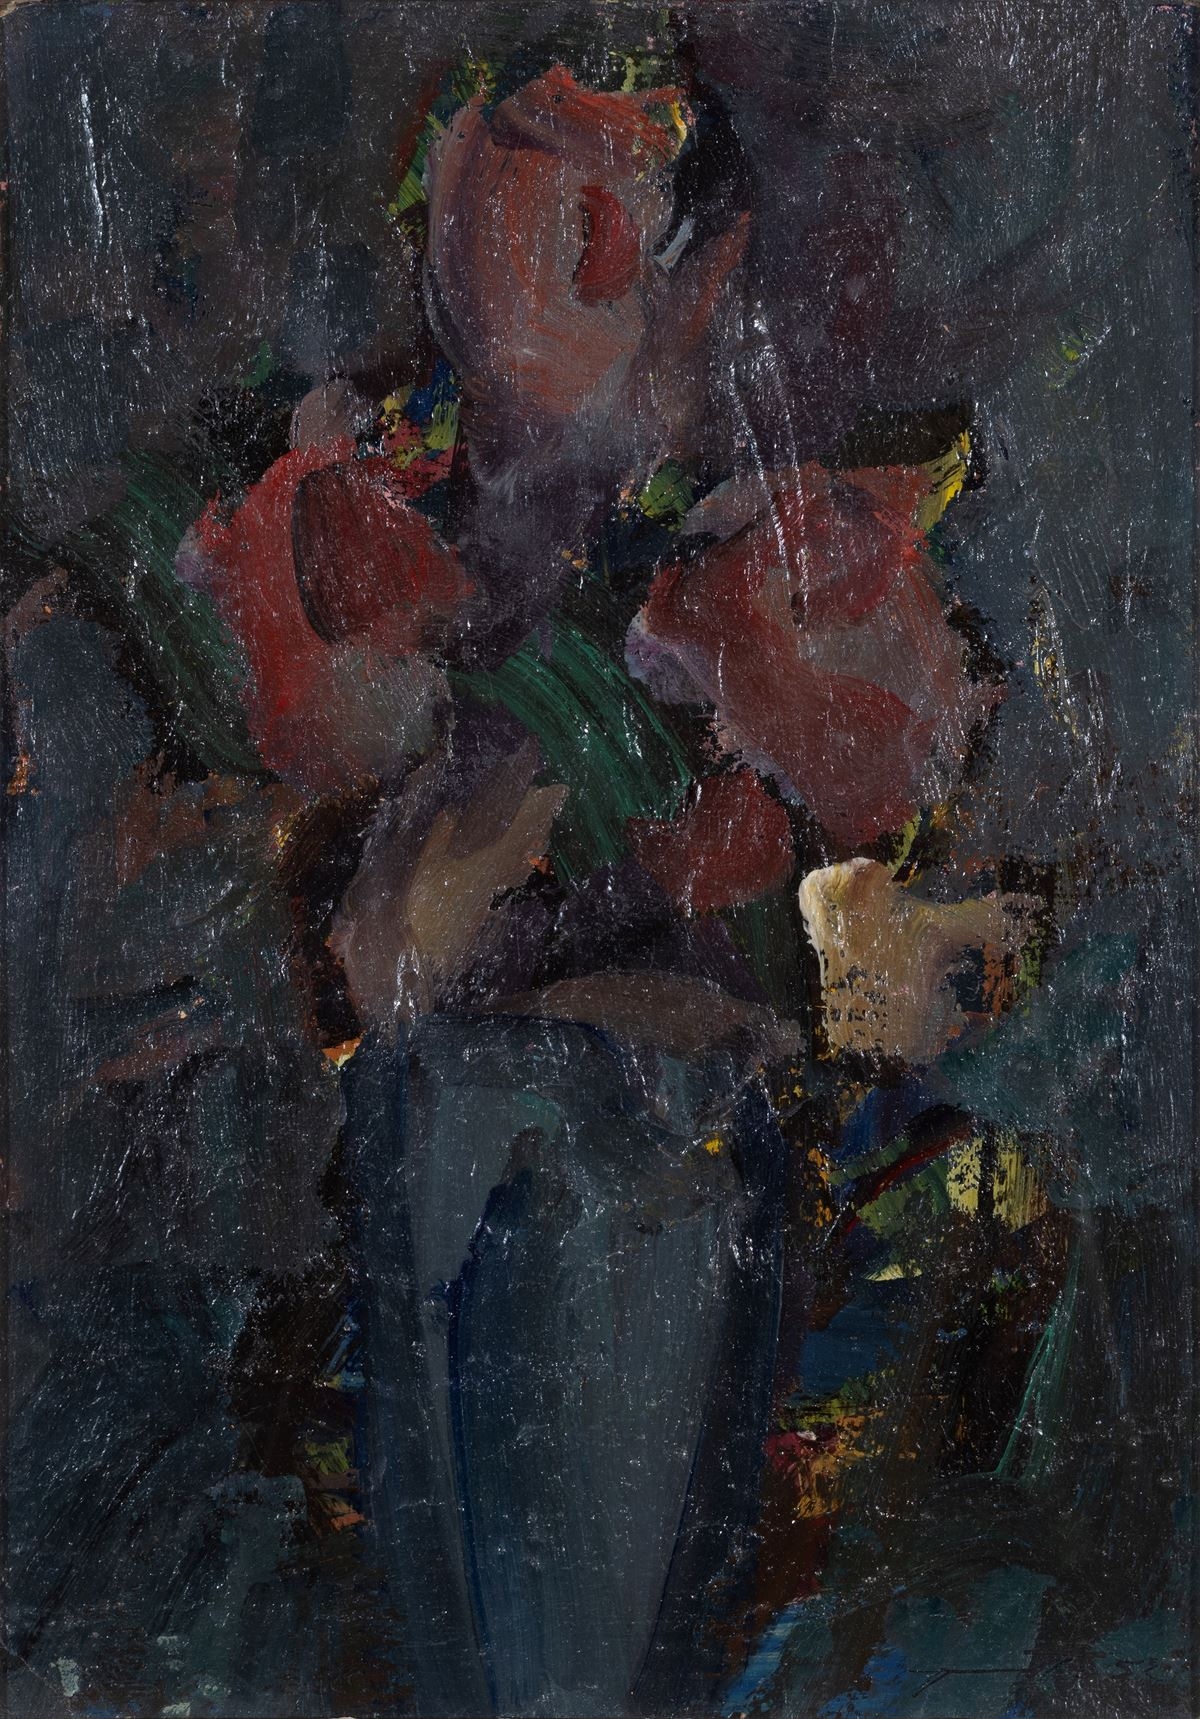 without title, 1952 by Adriano Tuninetto, 1952